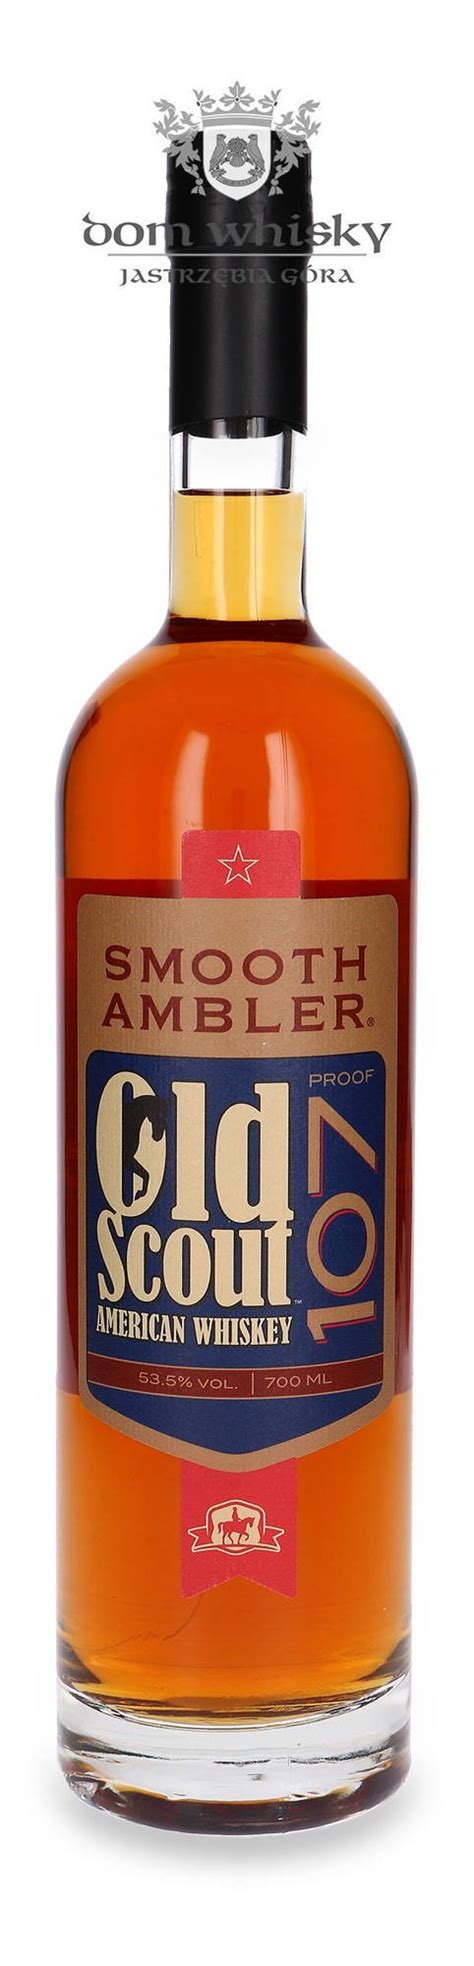 smooth ambler  scout  proof american whiskey   dom whisky